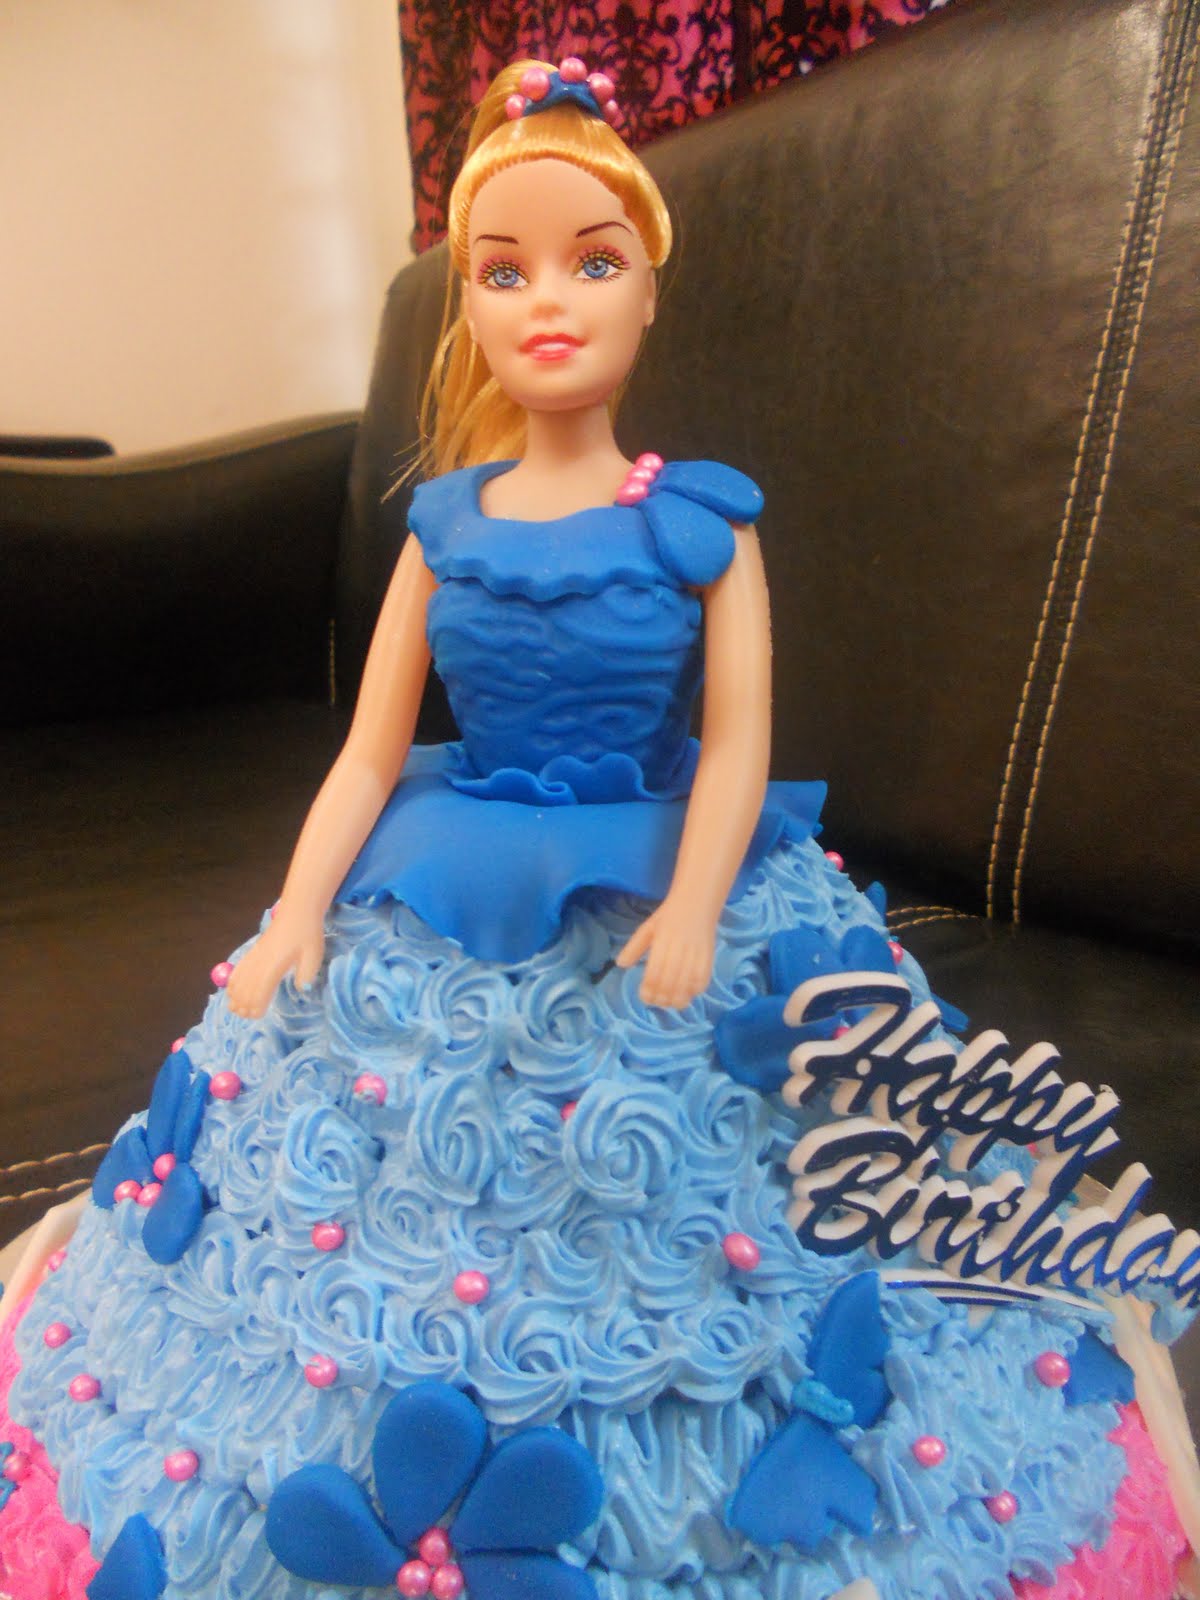 topping for ~Barbie doll cake make in blue Cupcakes at to Putrajaya~: buttercream cupcakes  how theme~